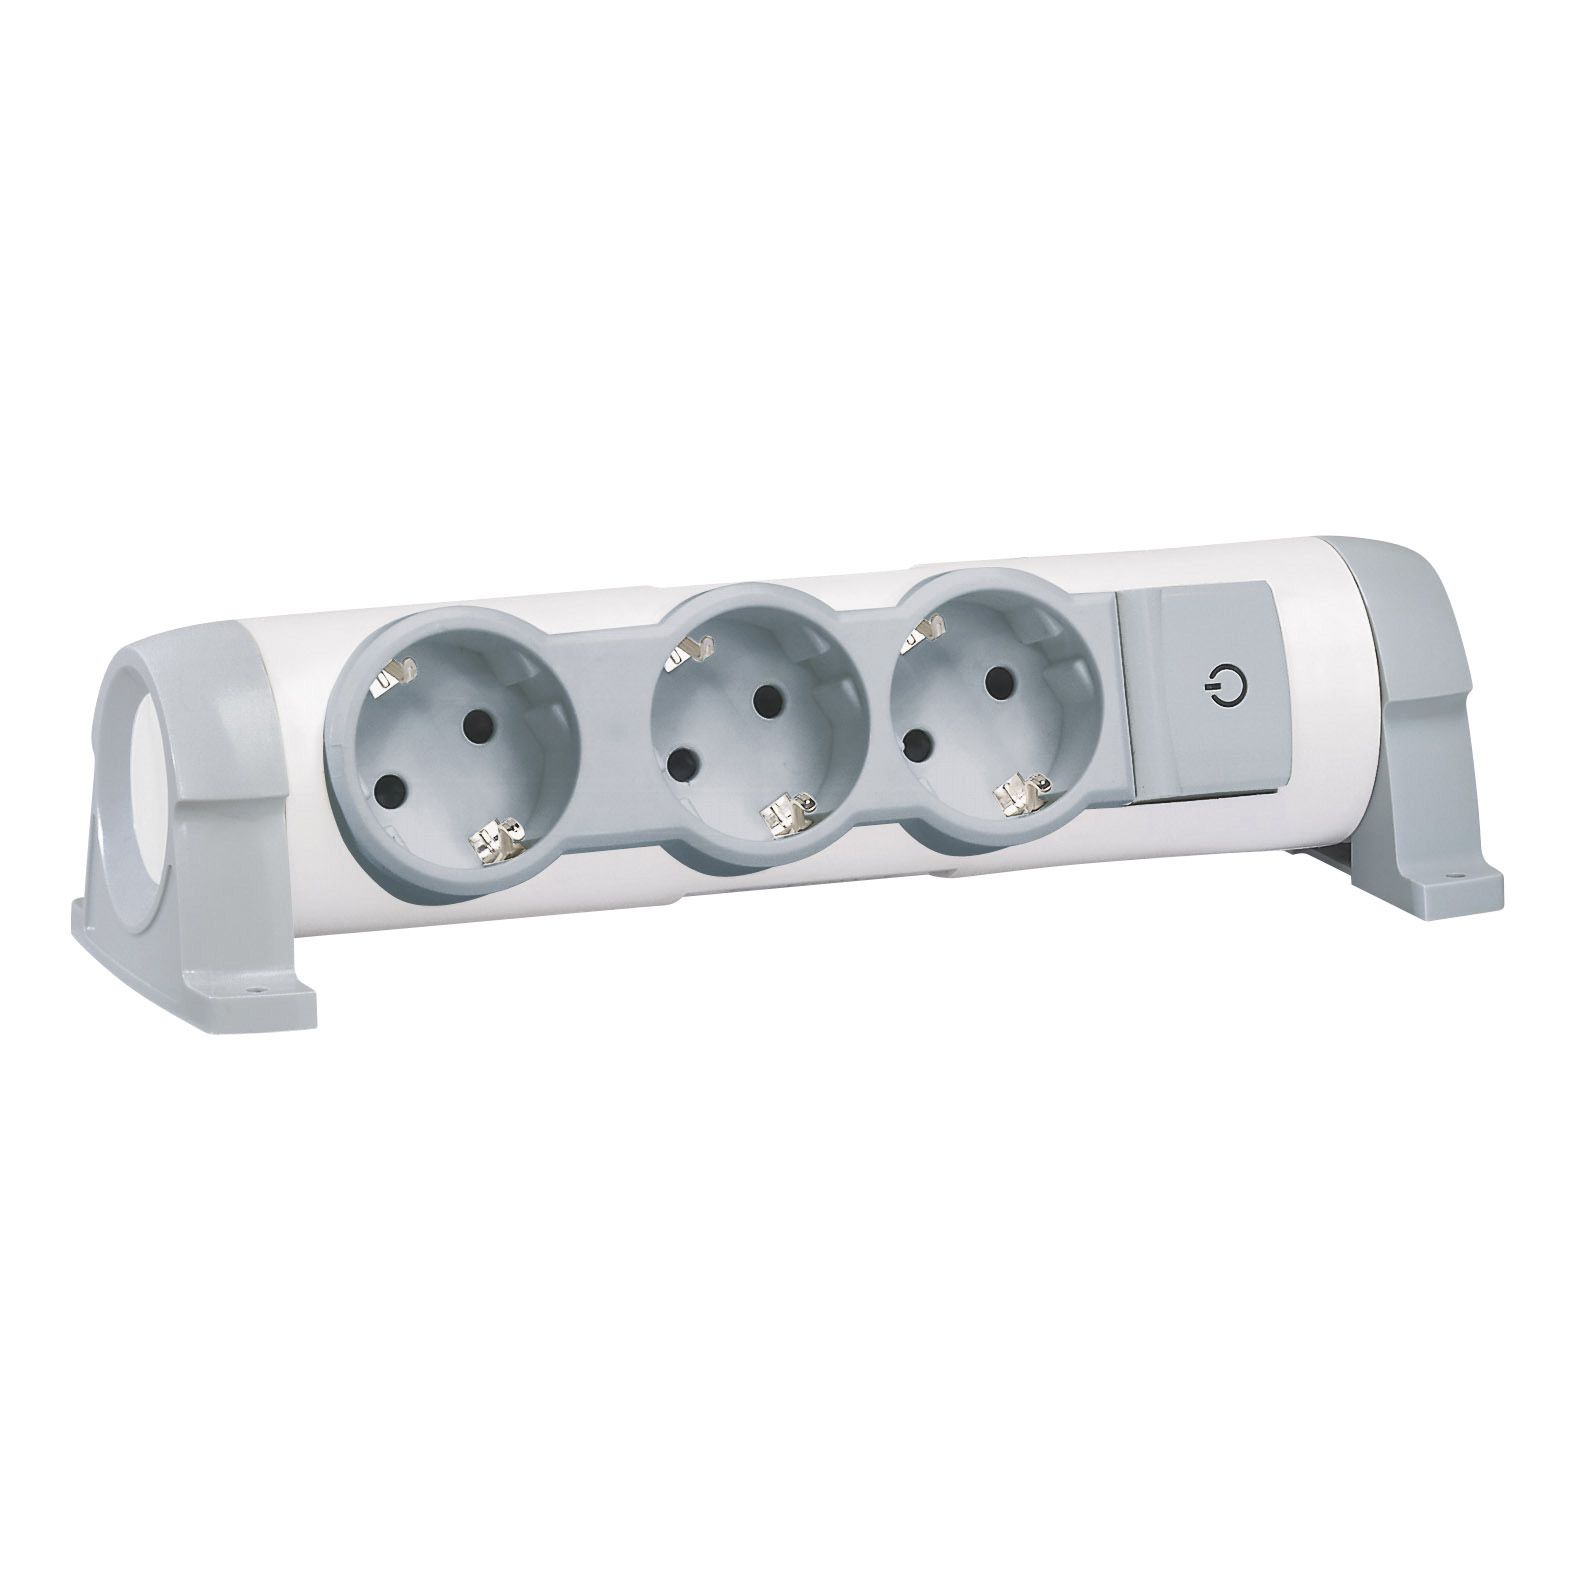 Multi-outlet extension for comfort - 3x2P+E orientable - w/o cord